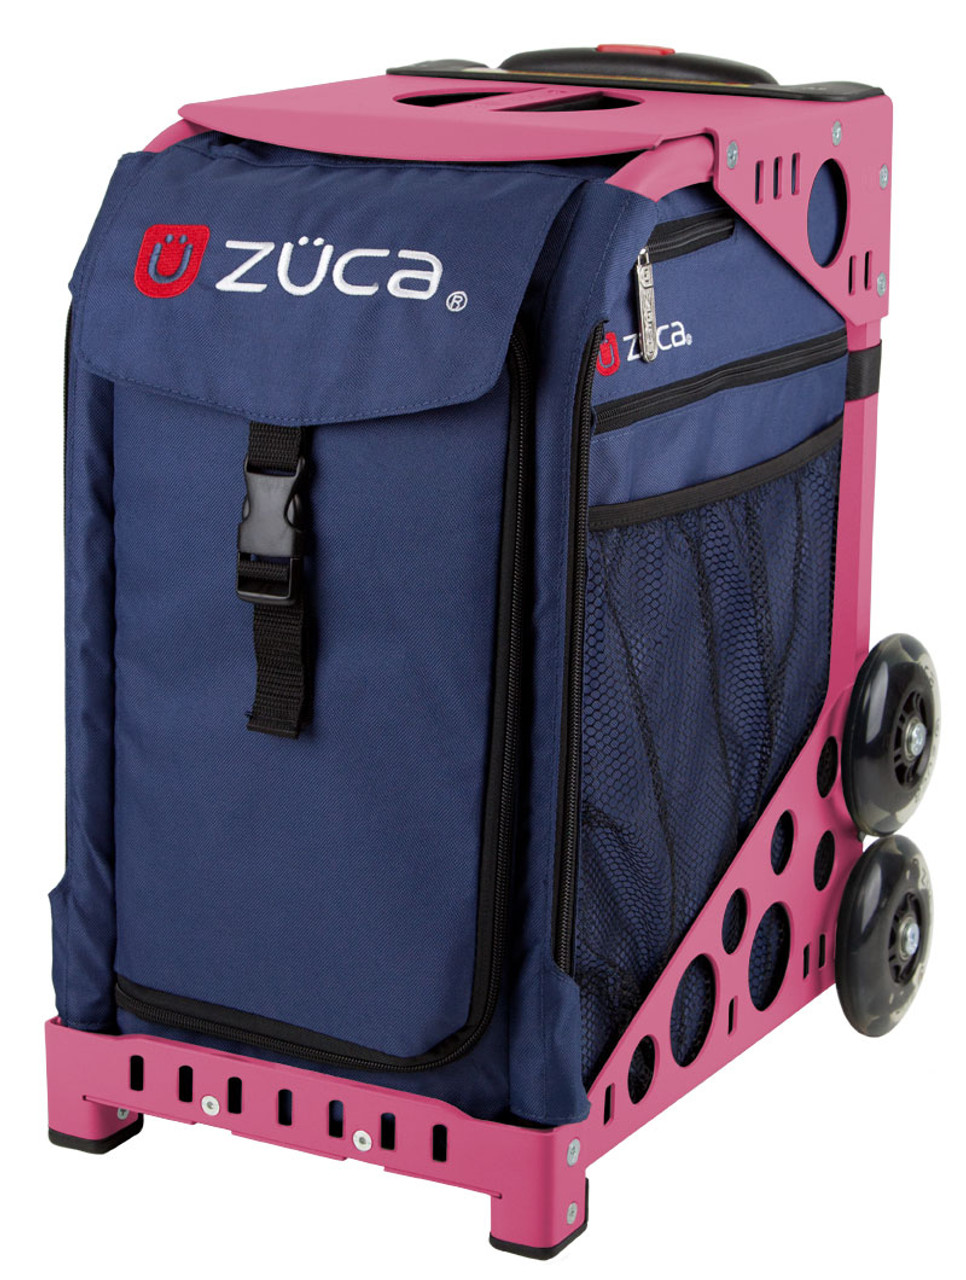 ZUCA Stealth Sport Insert Bag with Pro Packing Pouch Set (5 Large and 1  Small) Bundle (2 Items) : Sports & Outdoors - Amazon.com